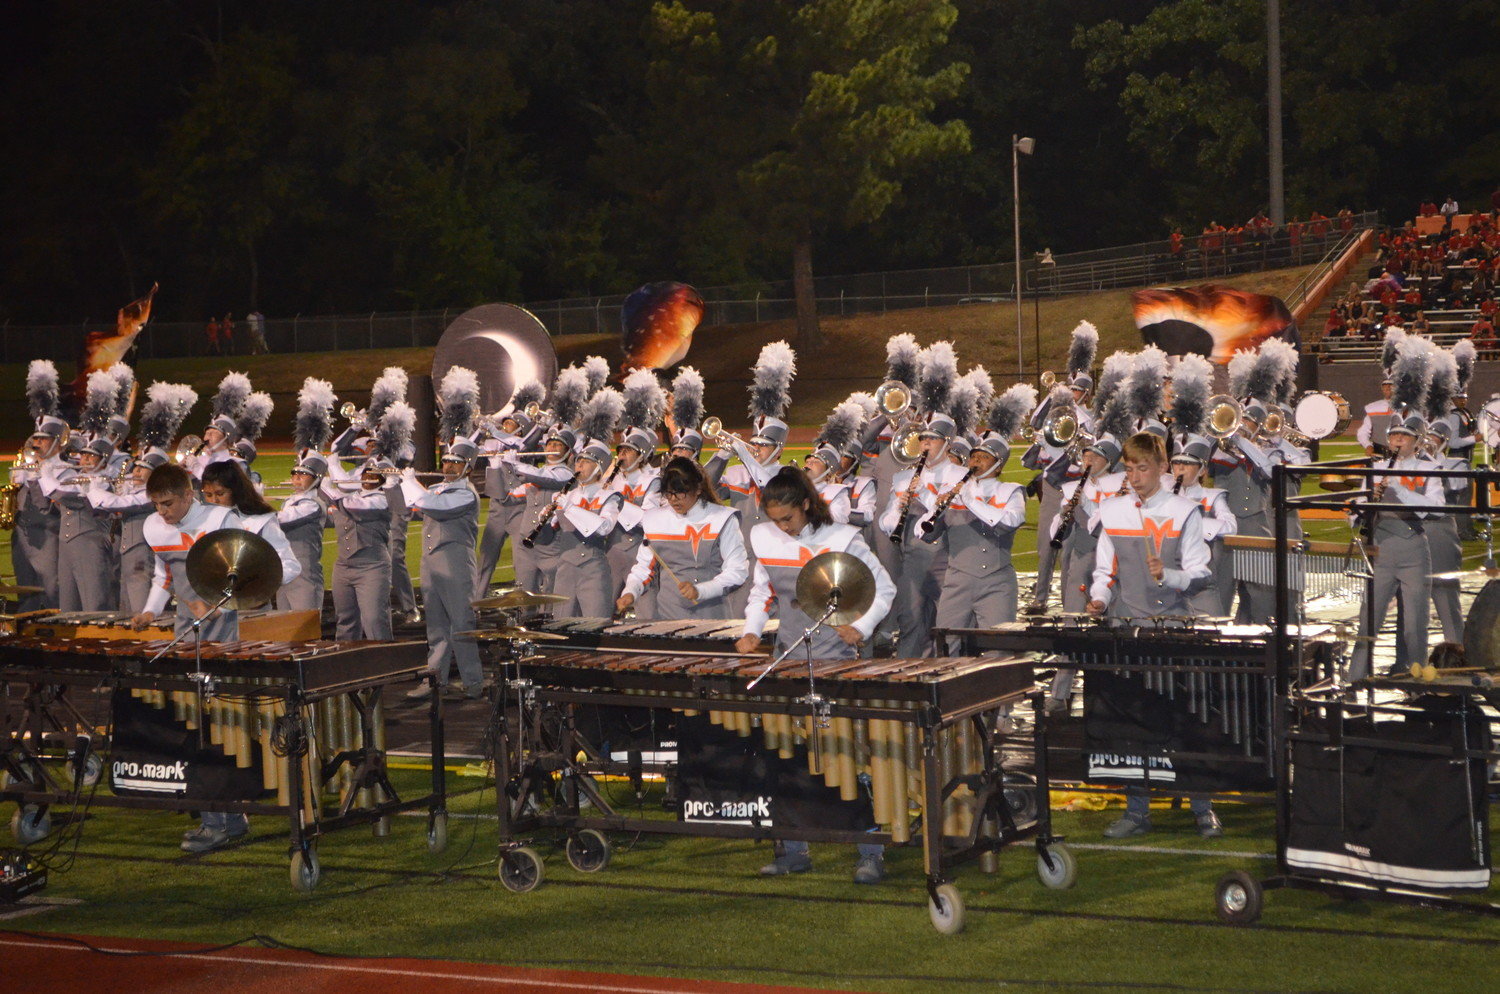 Mineola High School’s “Swarm of Music” performs “Total Eclipse” under the lights of Meredith Stadium during the Mineola Marching Festival on Oct. 8.